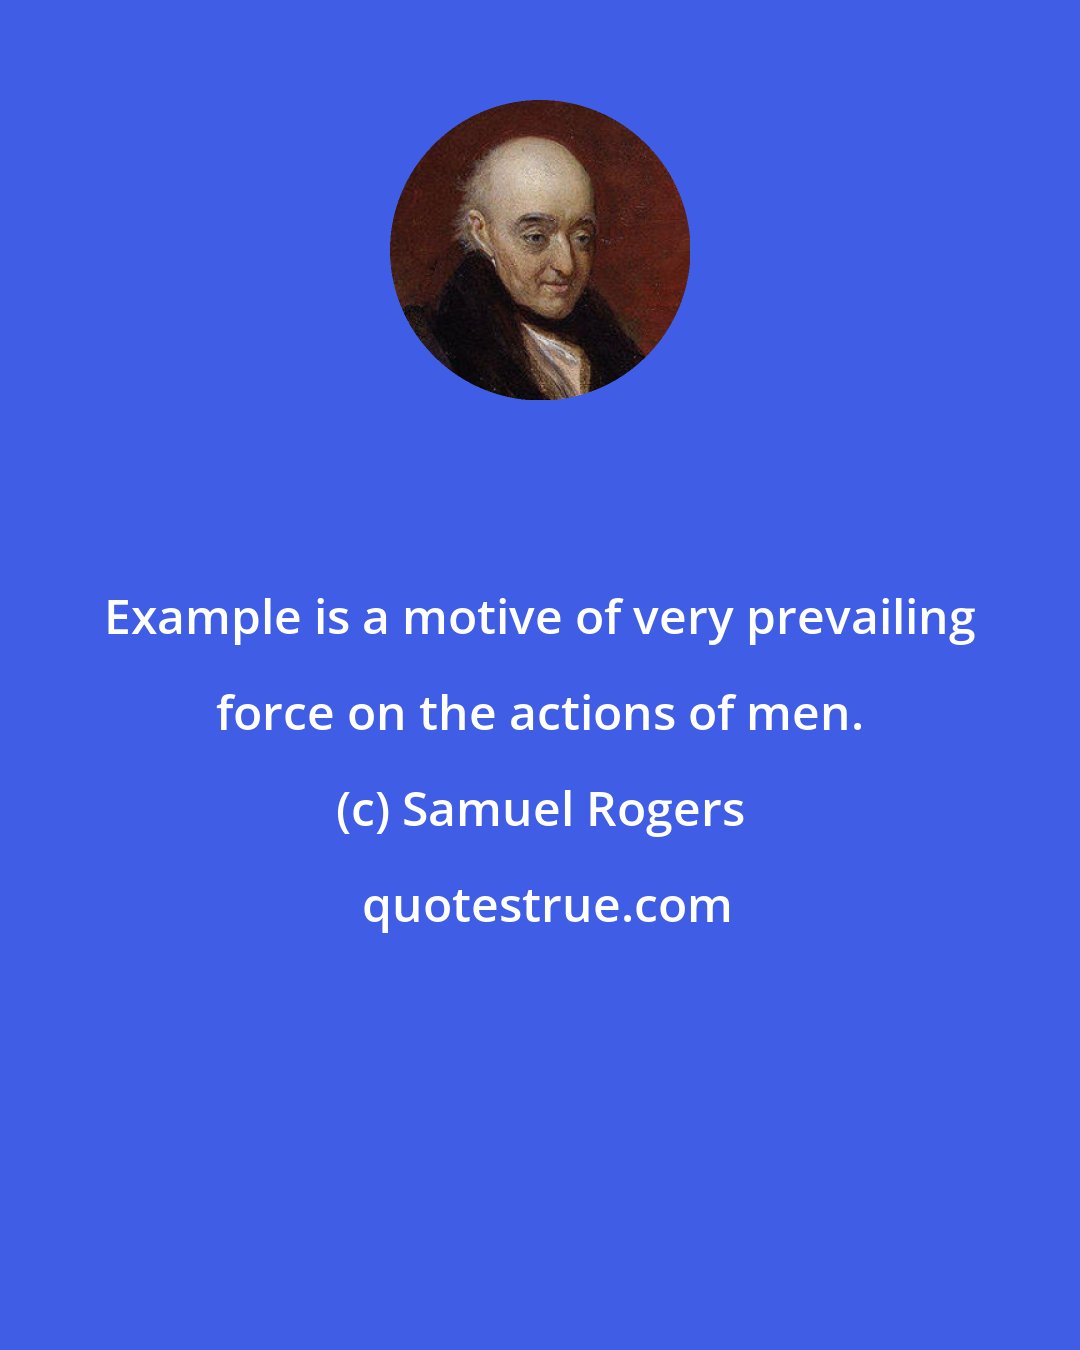 Samuel Rogers: Example is a motive of very prevailing force on the actions of men.